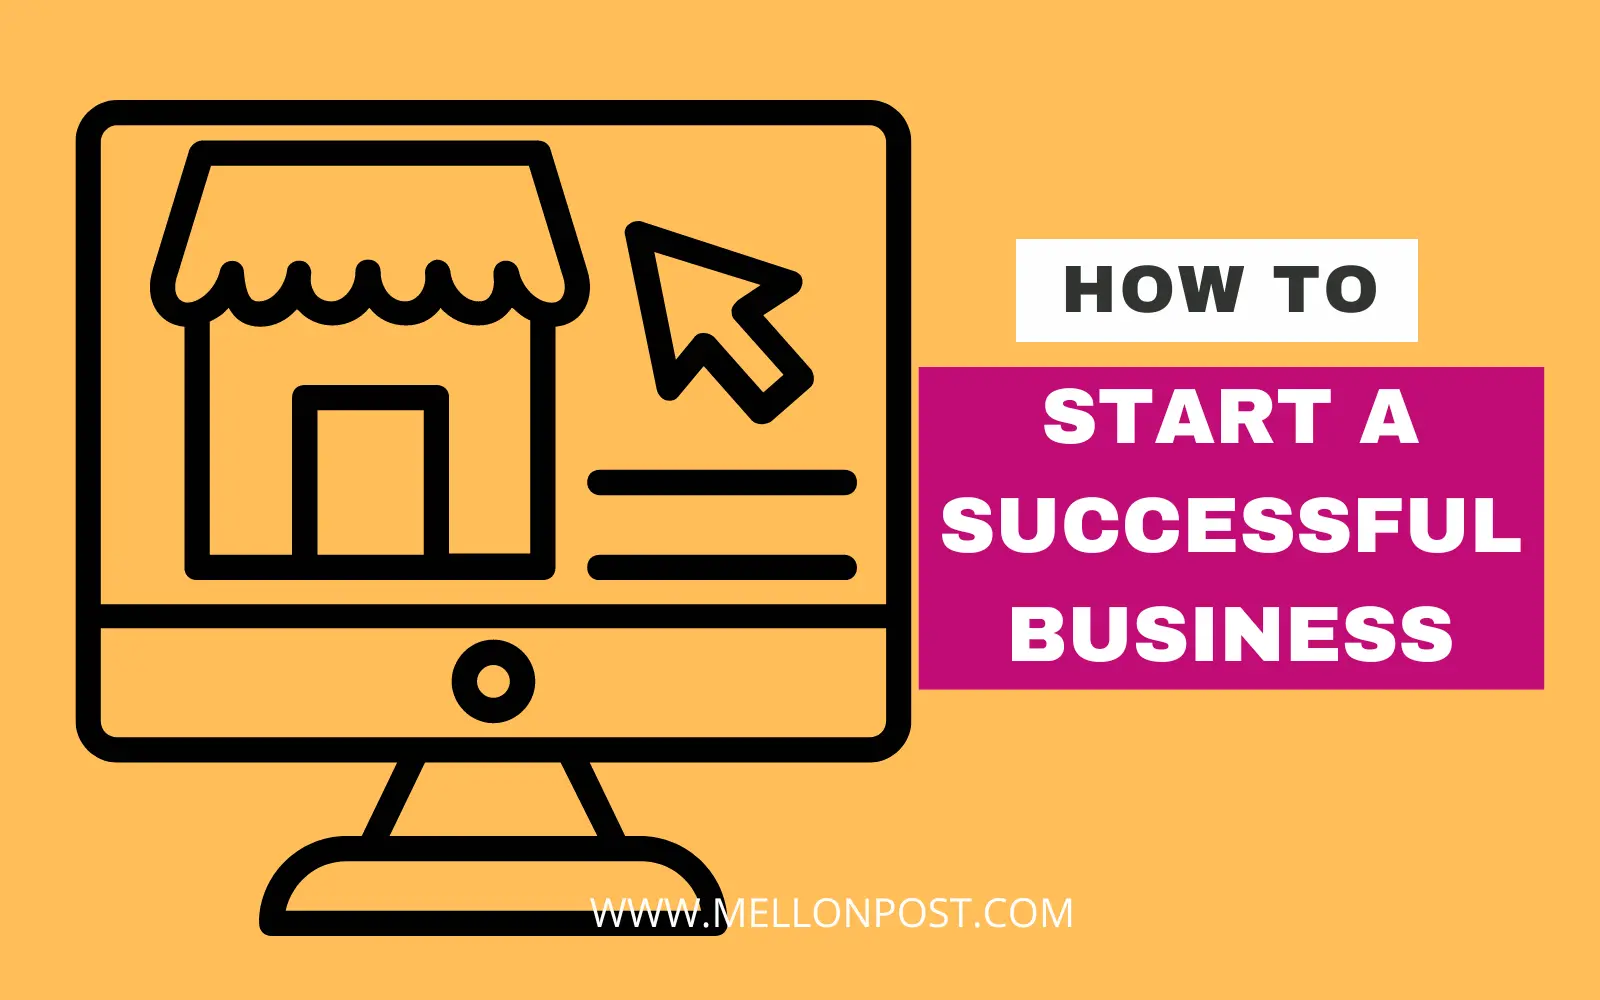 How can I start a successful business ?